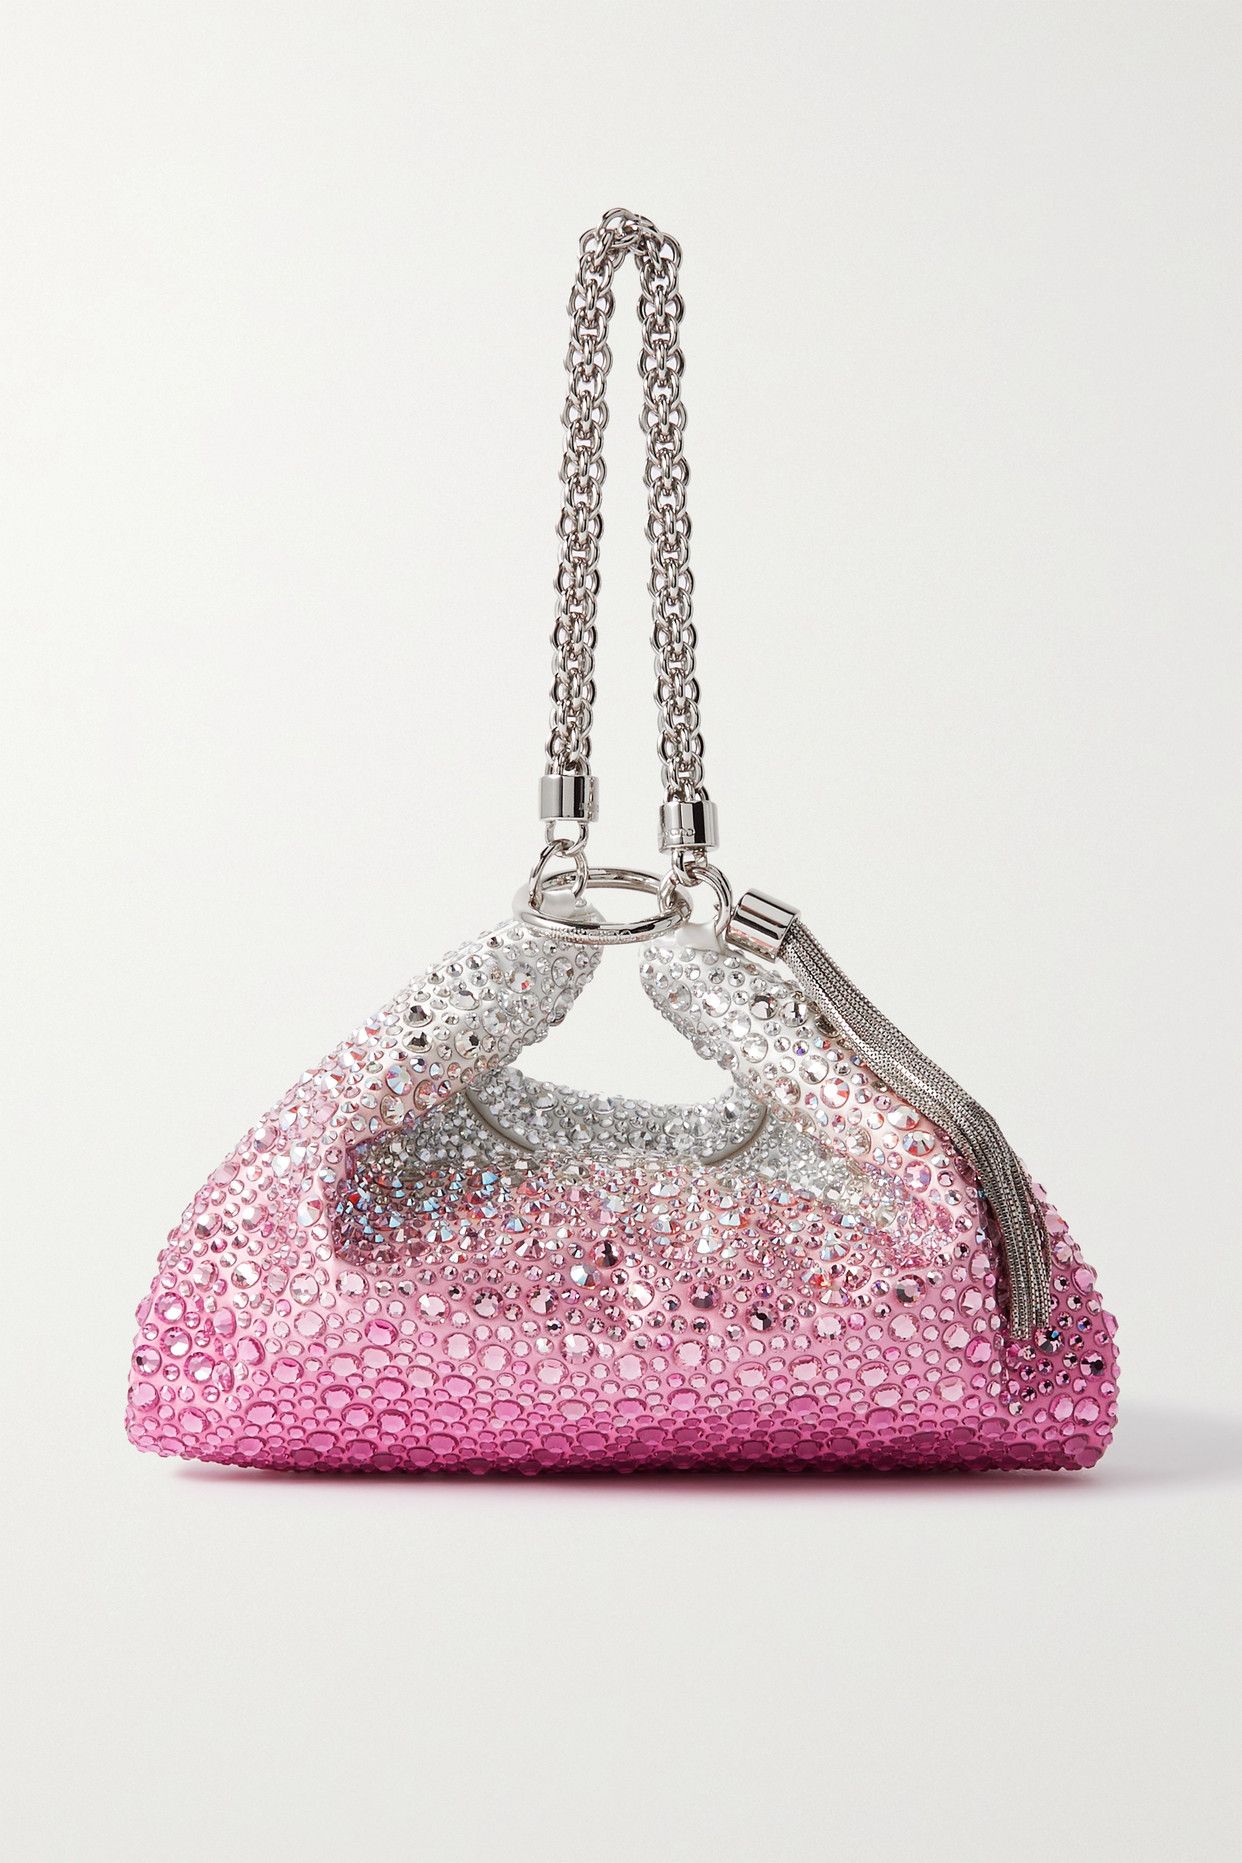 Jimmy Choo Bags: Indulge in Luxury and Glamour with Jimmy Choo Bags